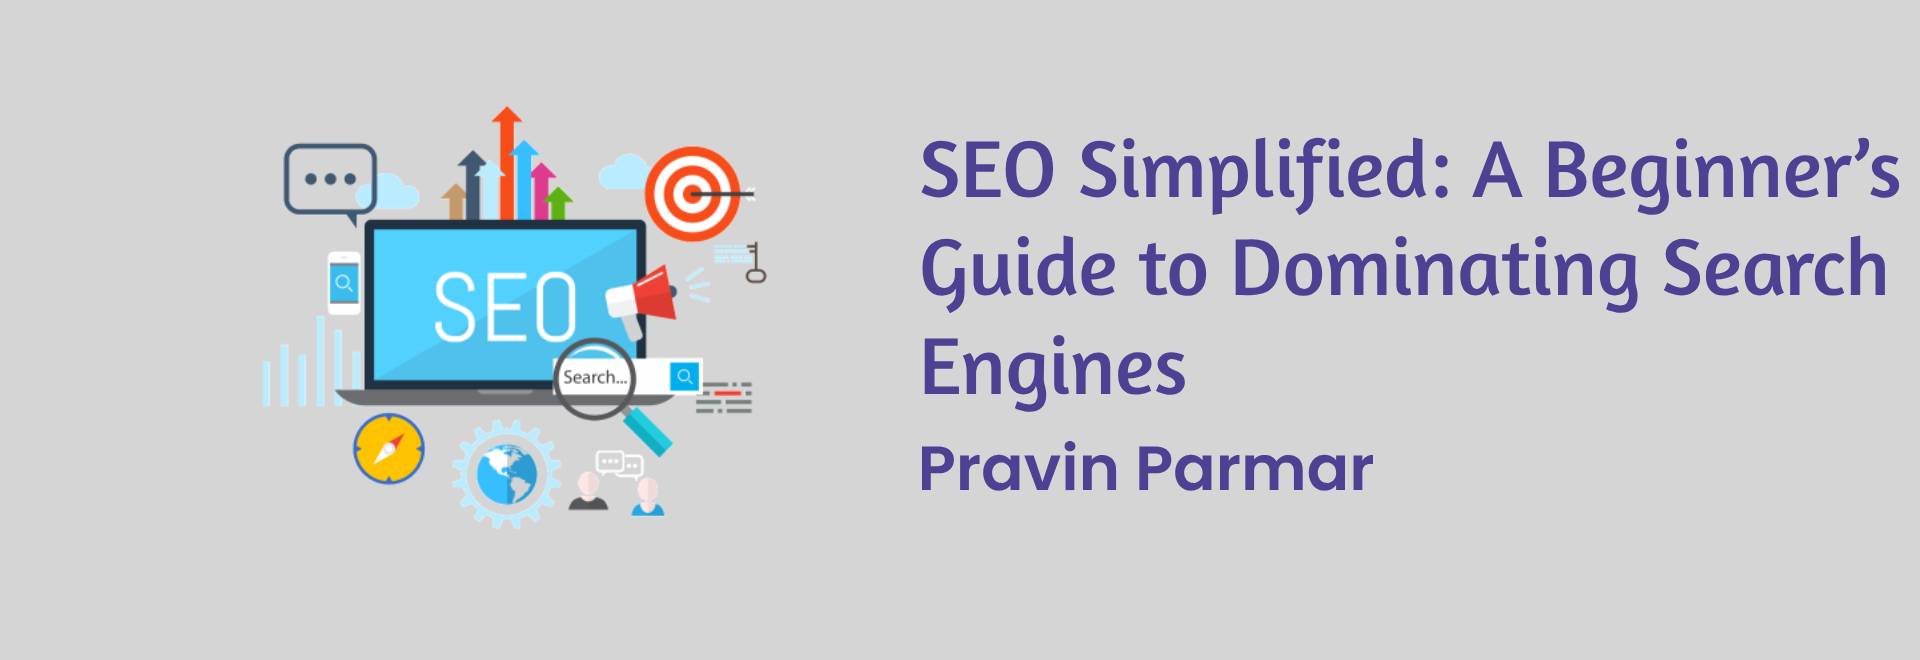 SEO Simplified: A Beginner’s Guide to Dominating Search Engines